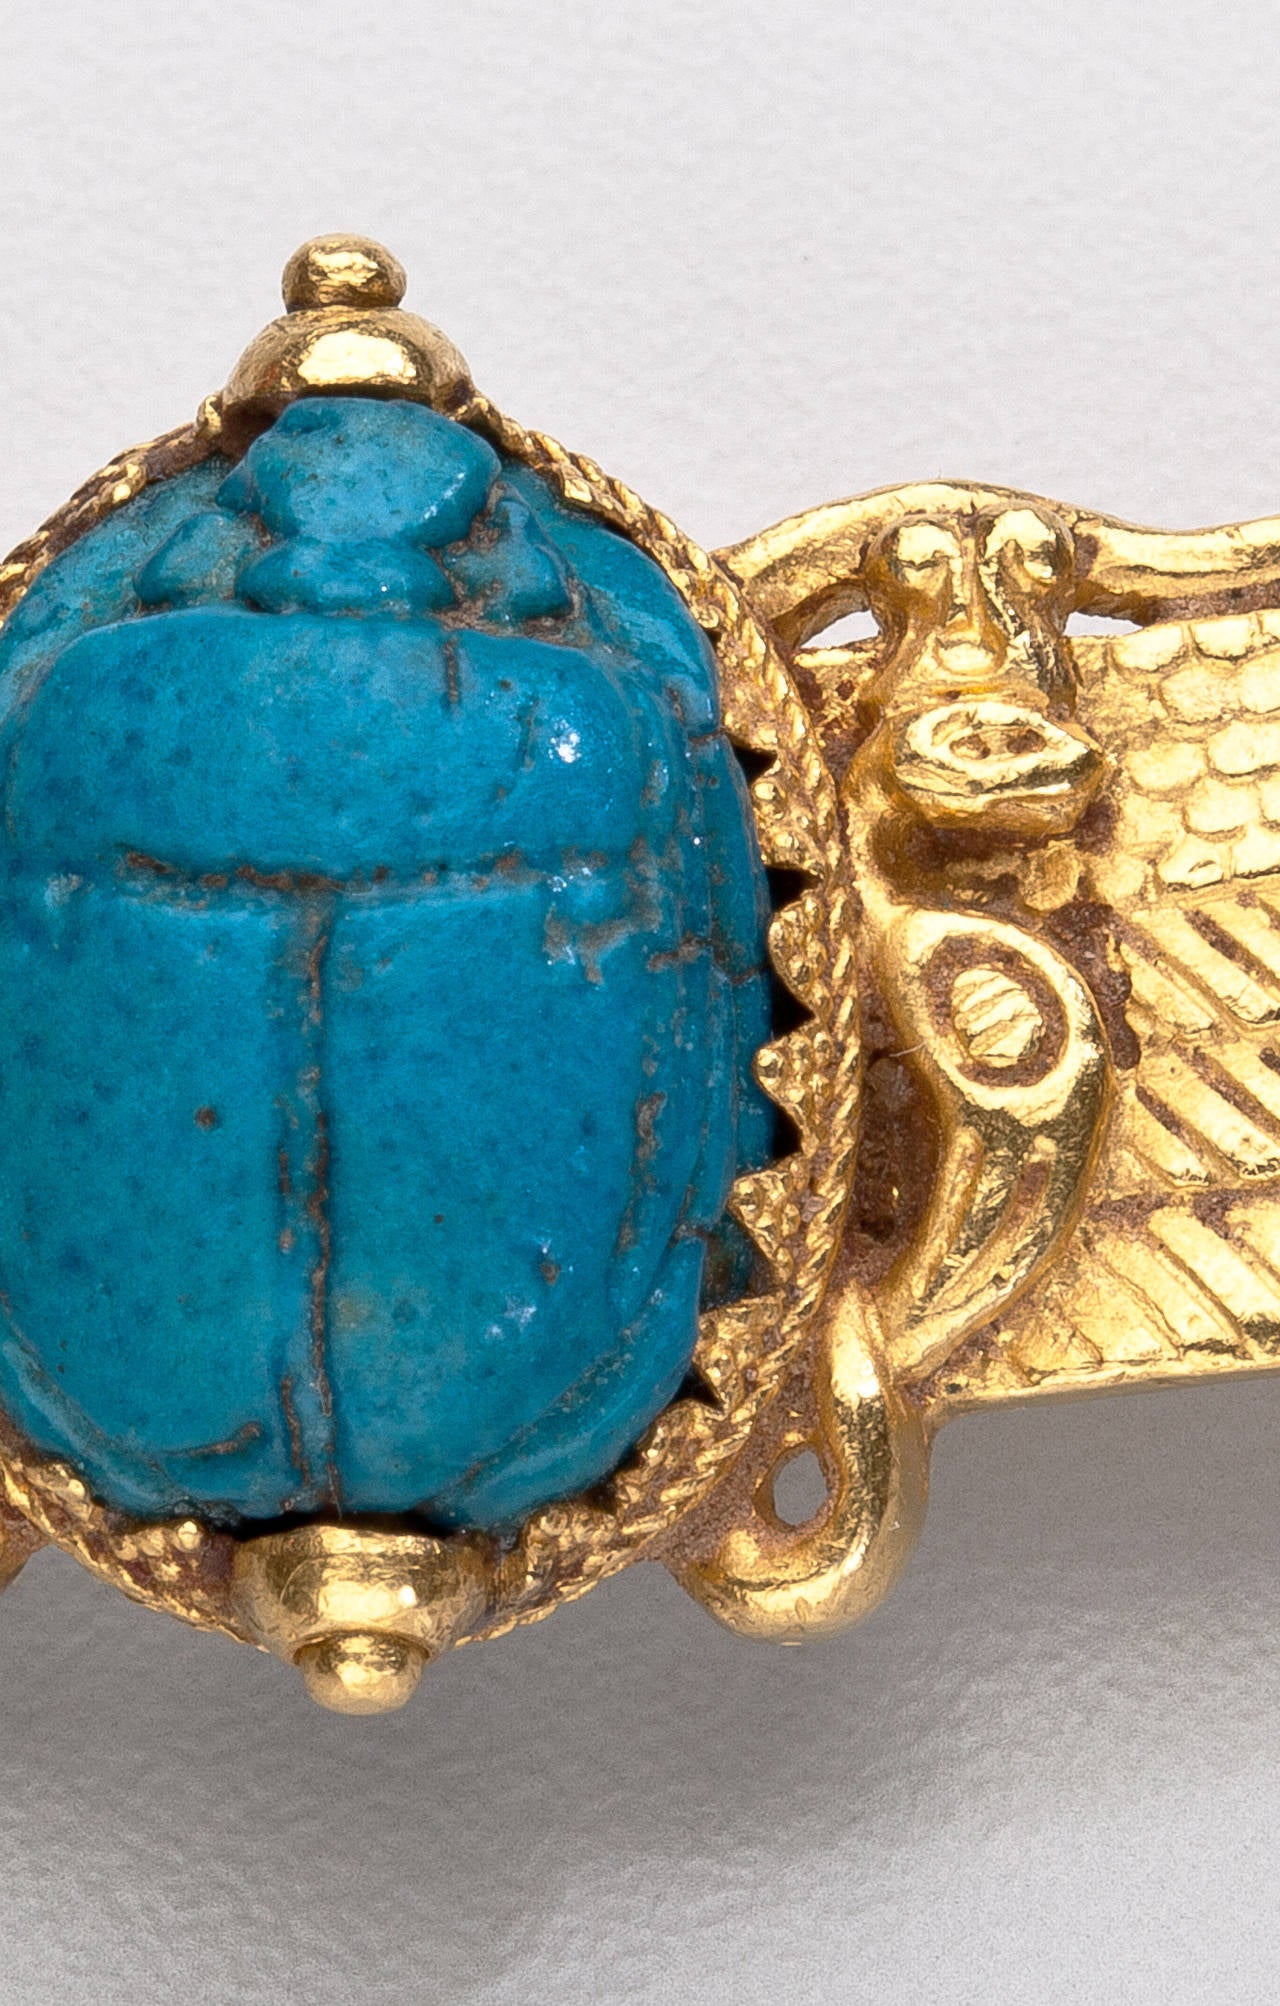 An antique scarab brooch in the Egyptian Revival style by Jules Wiese.  The high karat gold brooch has chased wings with two vultures supporting a turquoise hardstone scarab.  Gold granulation surrounds the bezel prongs supporting the scarab.  The